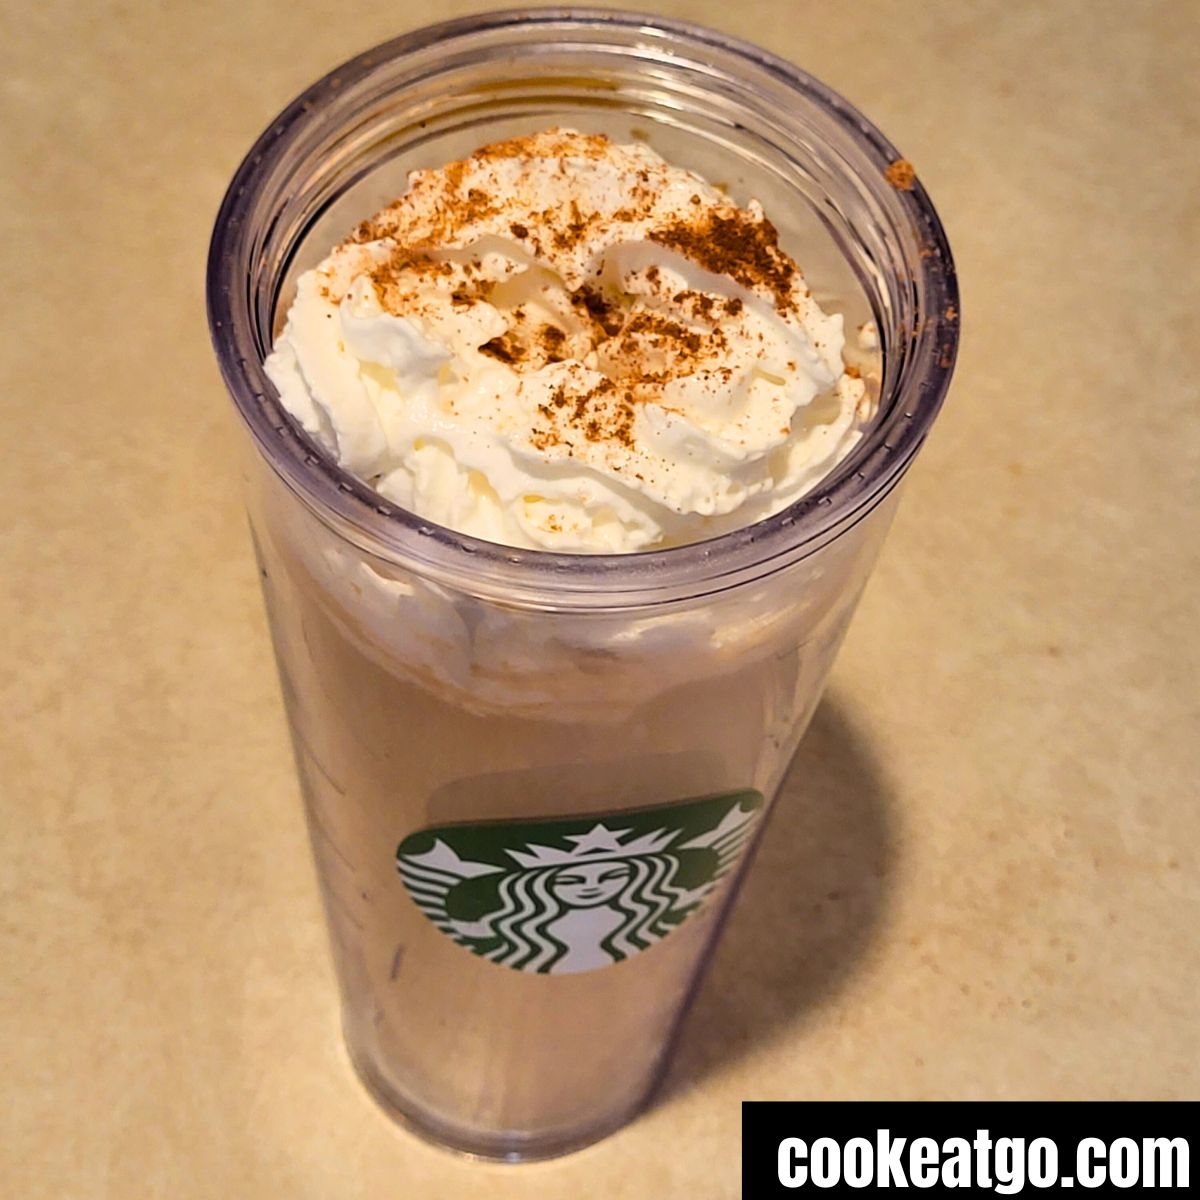 Skinny Pumpkin Spice latte topped with whipped topping sprinked with pumpkin spice seasoning in venti starbucks cup